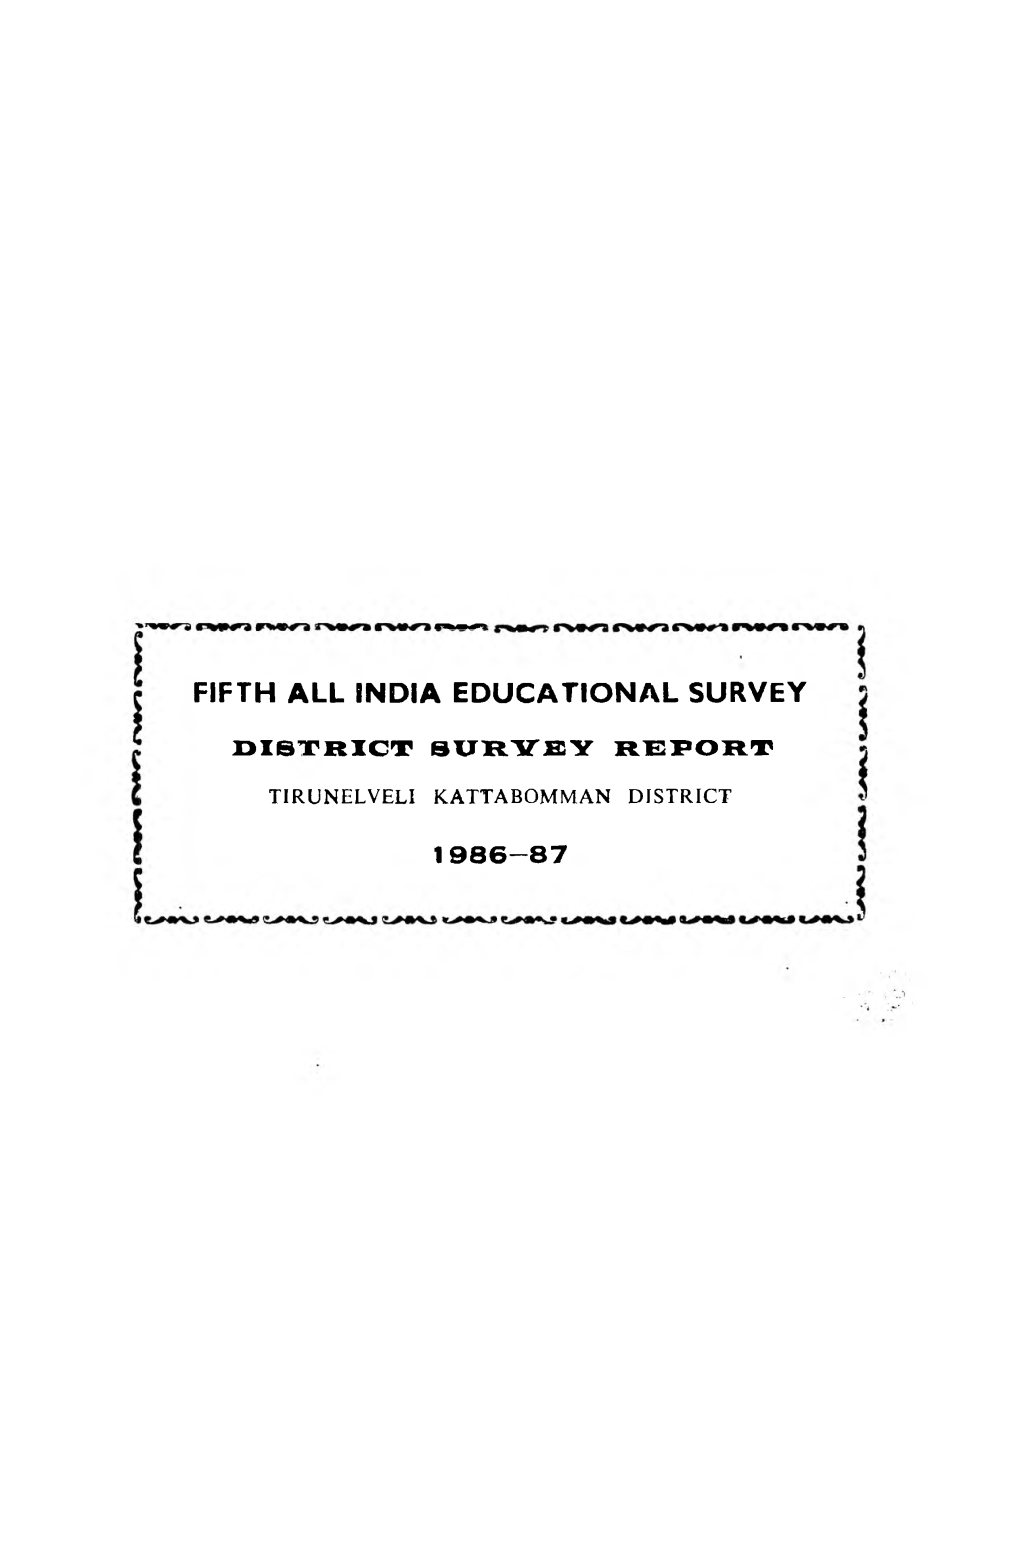 Fifth All India Educational Survey